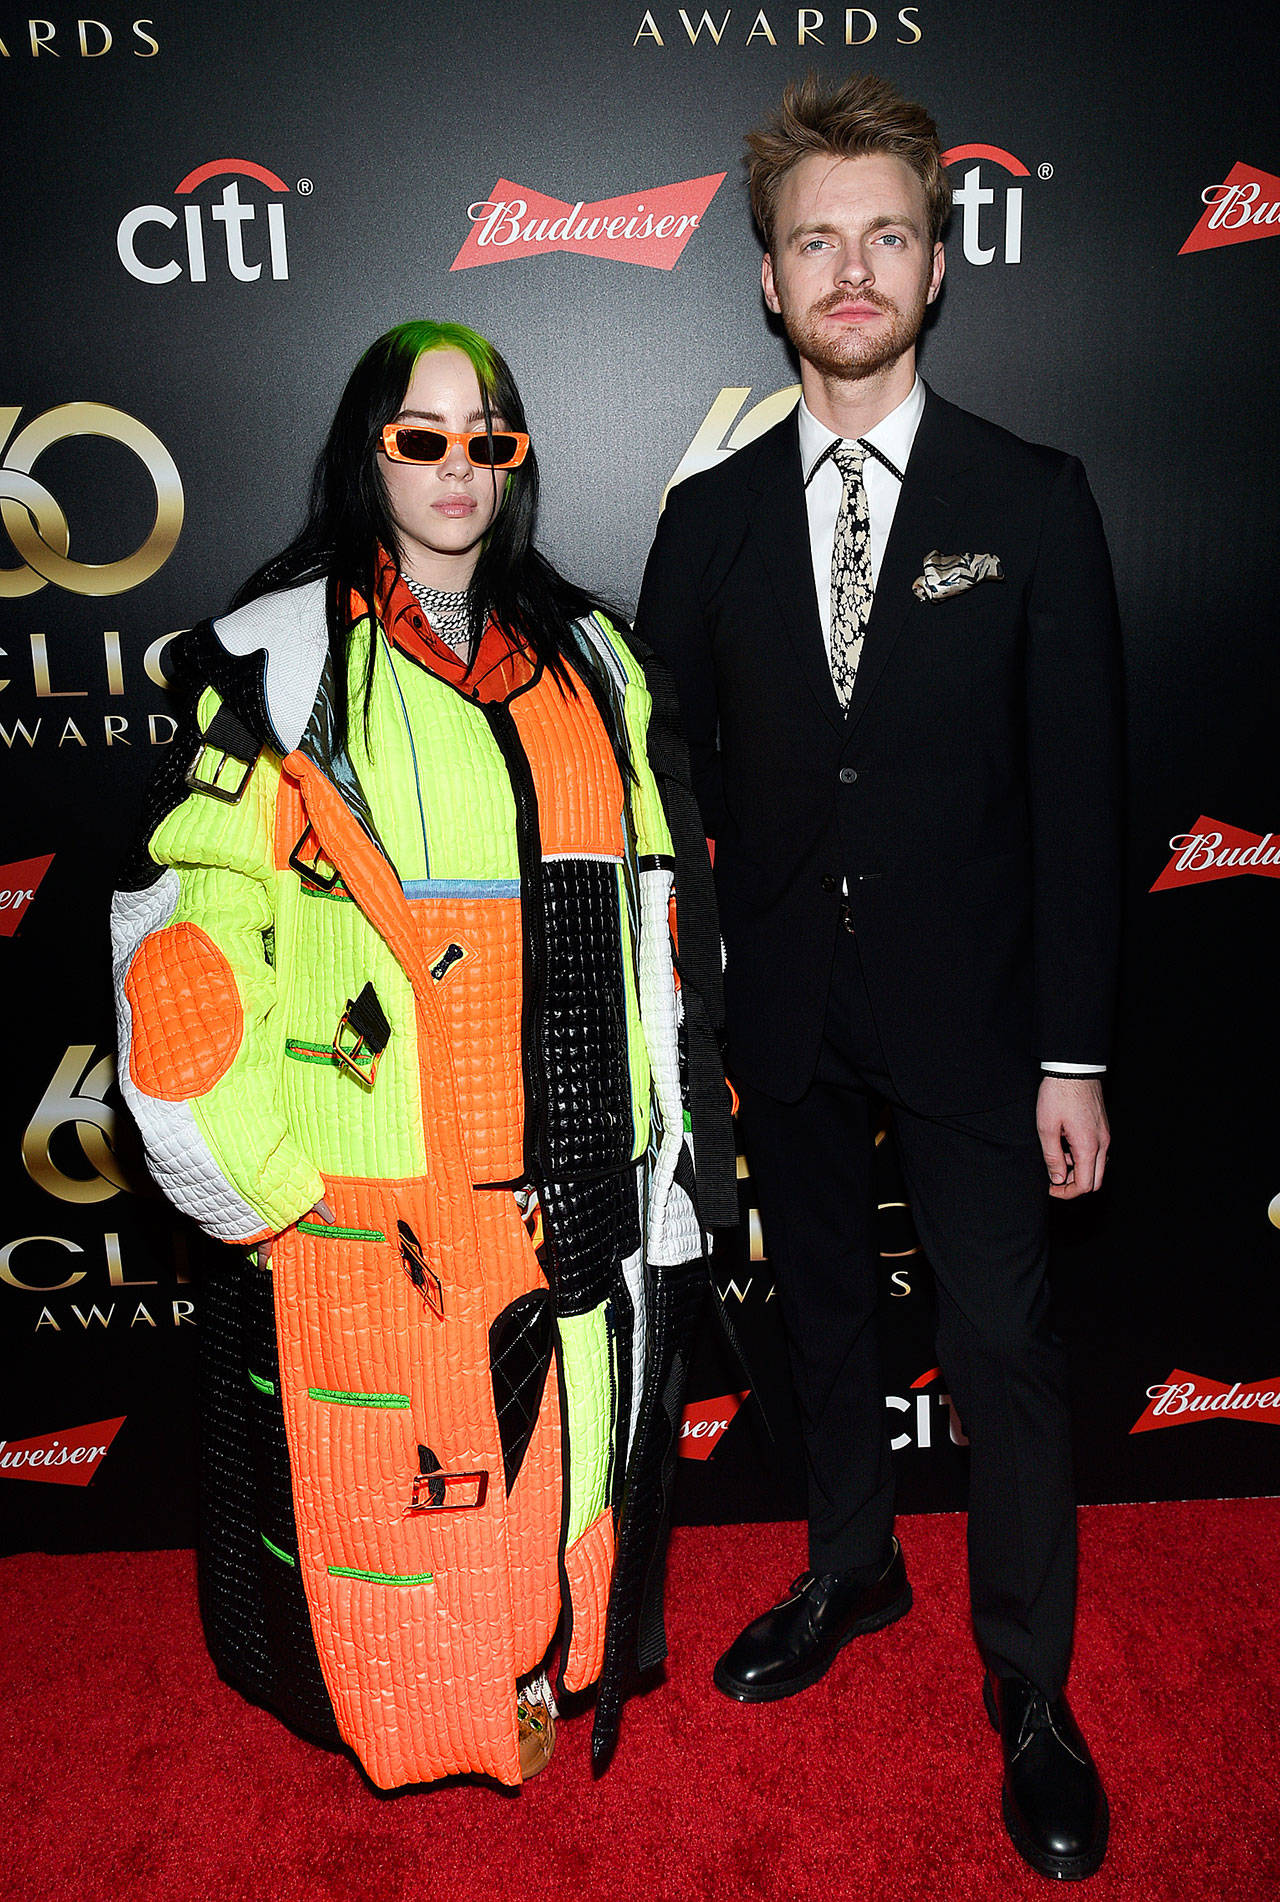 Billie Eilish earned six Grammy nominations on Nov. 20, and Finneas O’Connell, her brother-producer-engineer, earned five nominations. (Associated Press file)